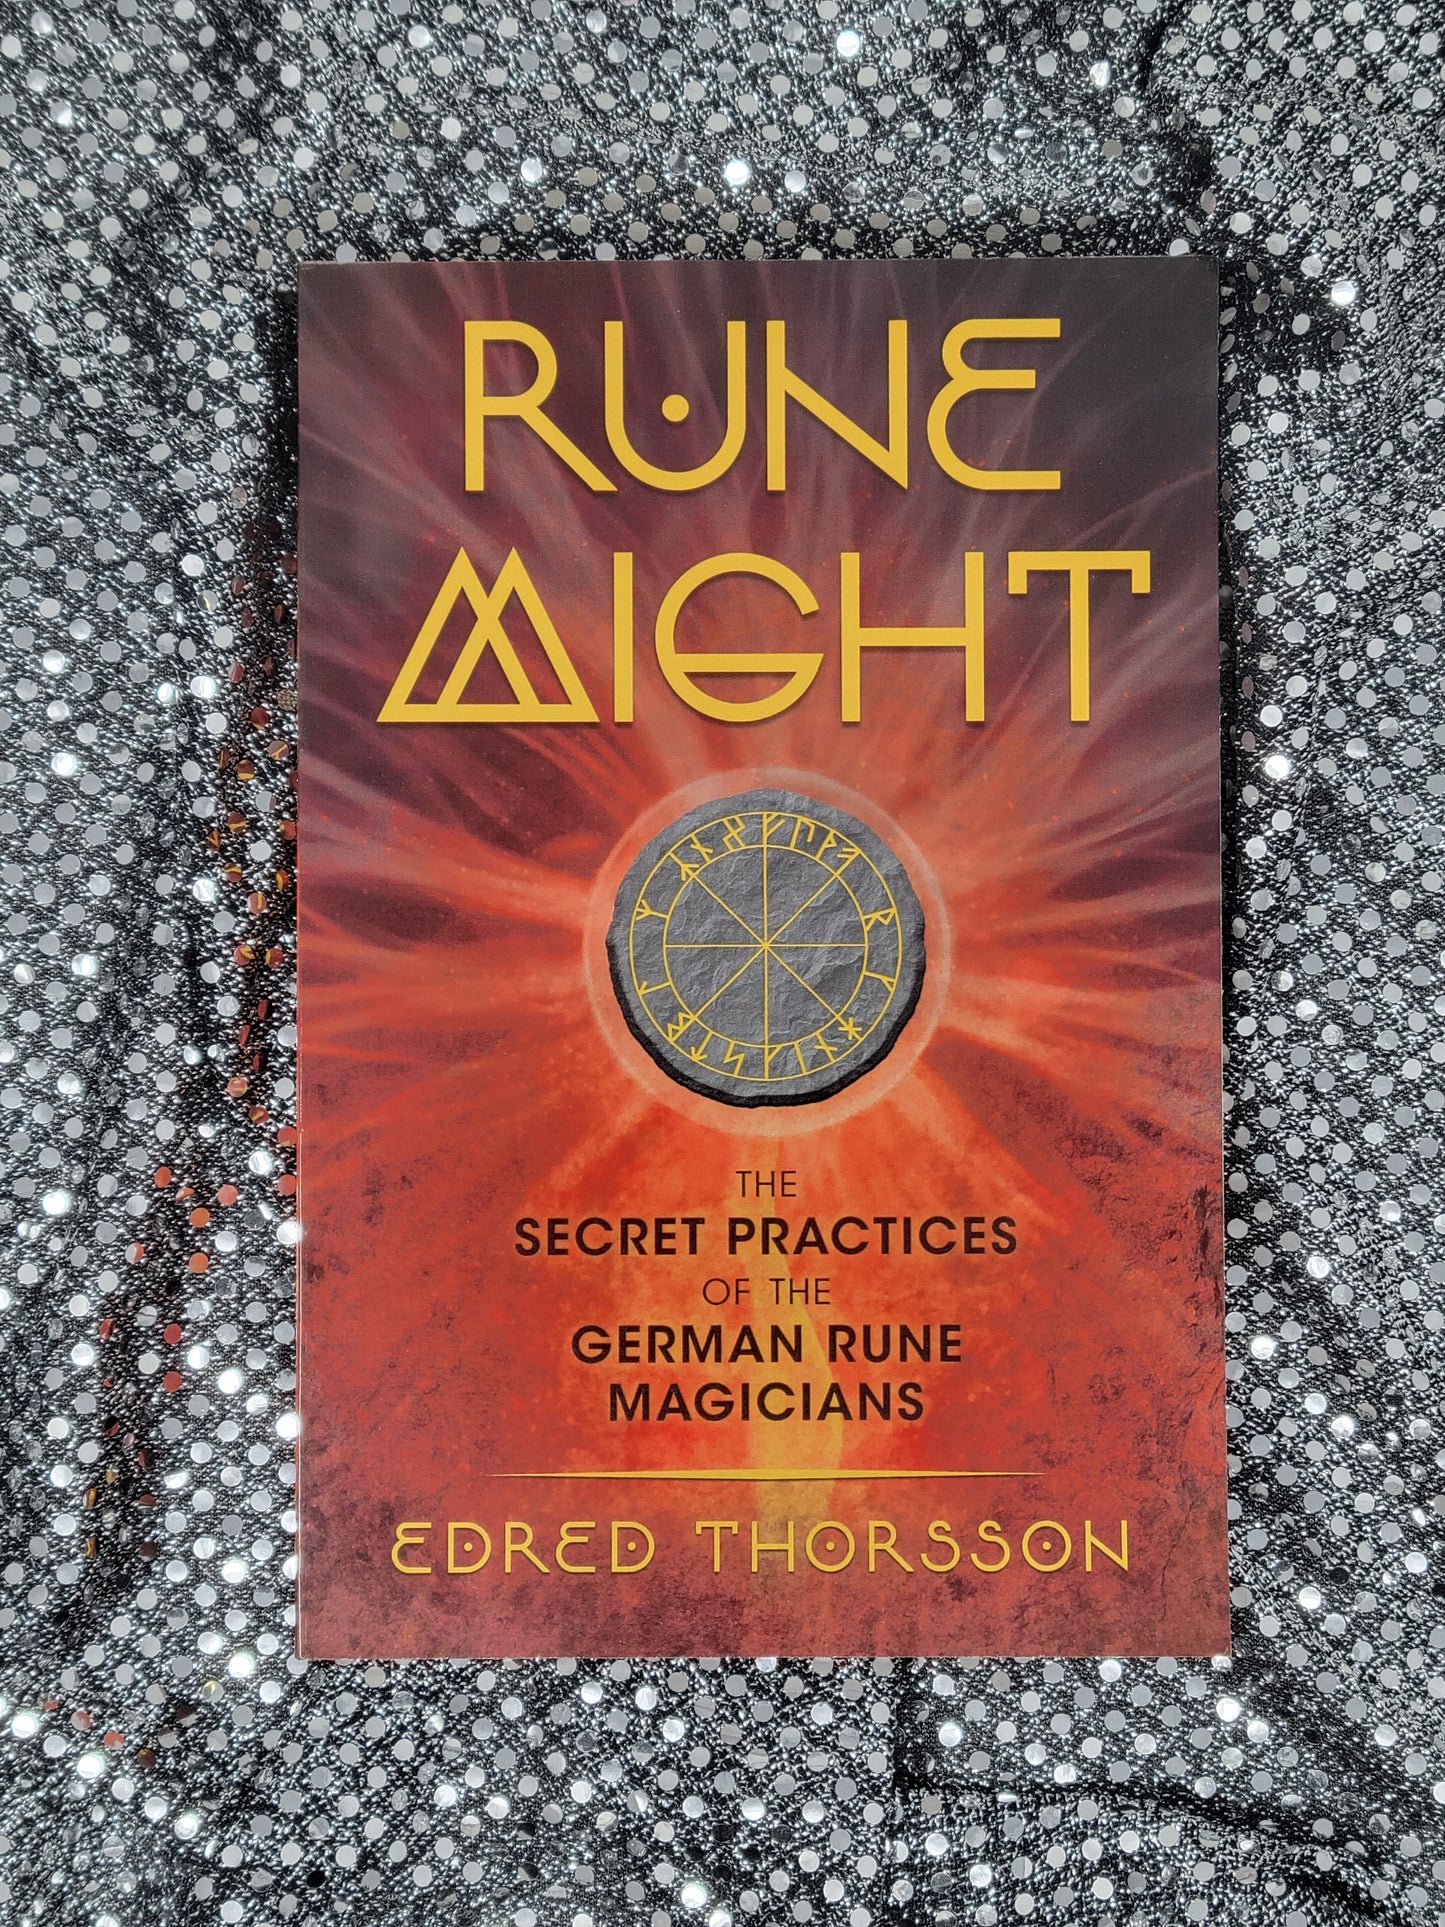 Rune Might The Secret Practices of the German Rune Magicians - By (Author) Edred Thorsson